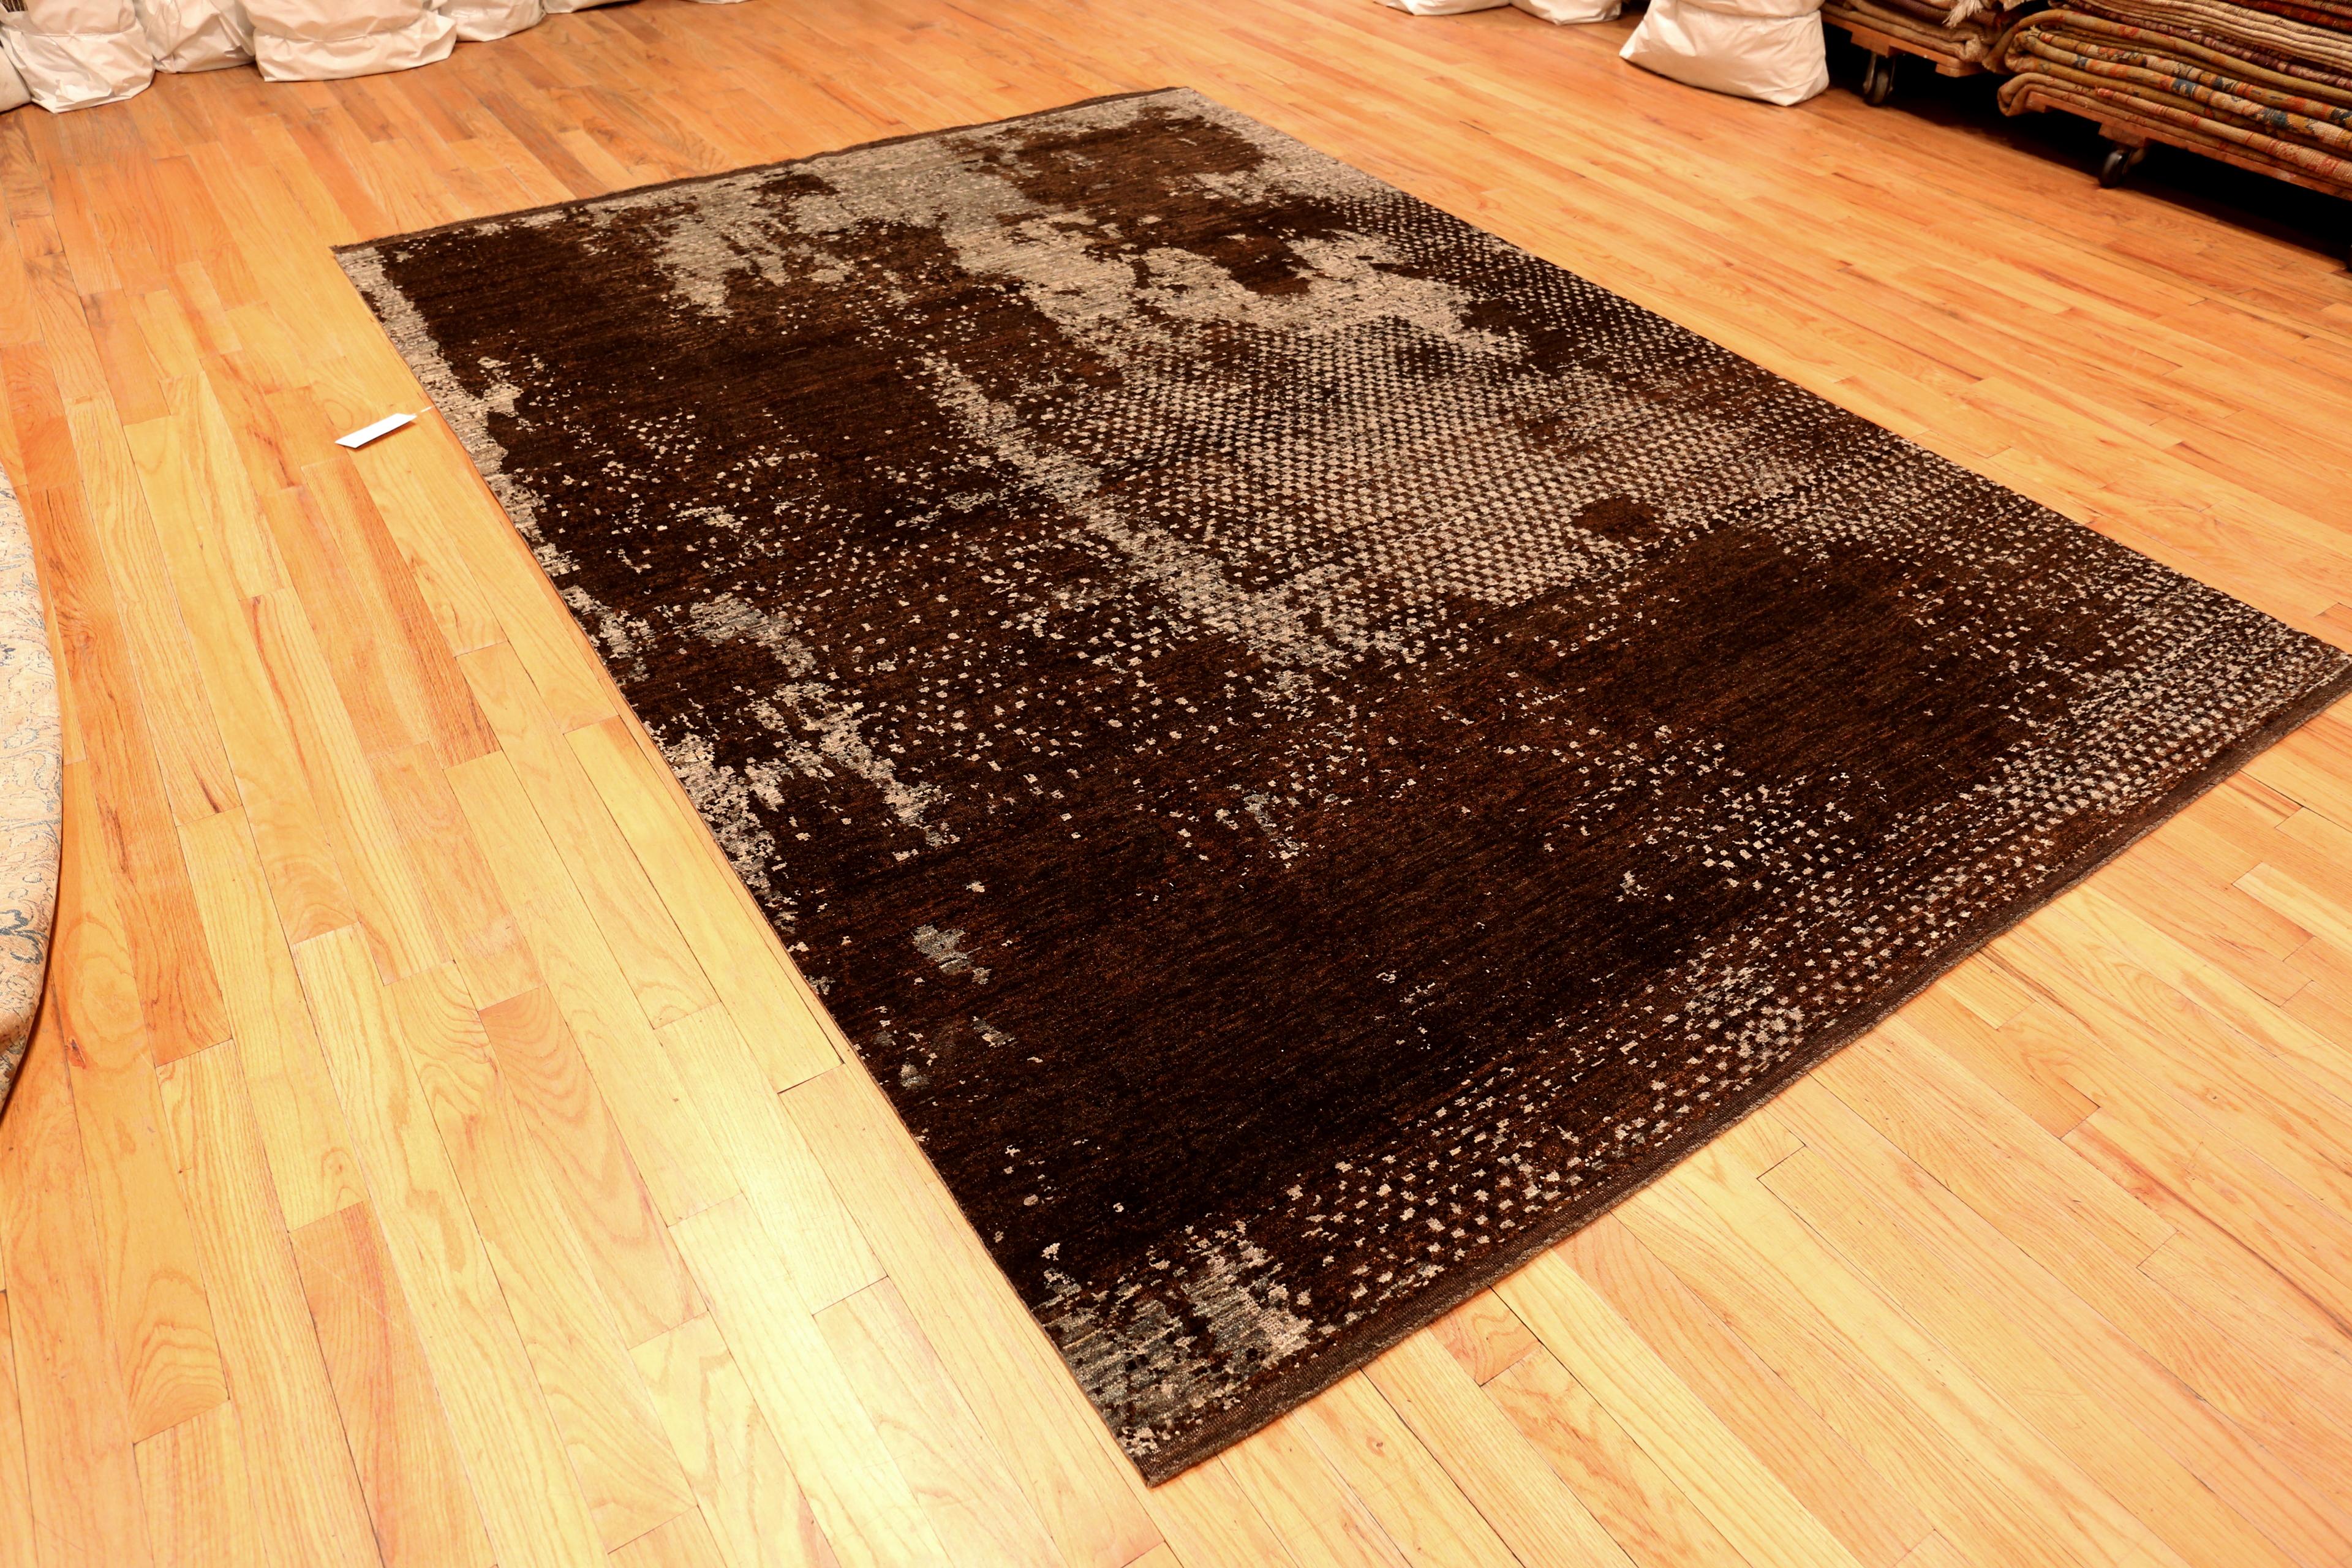 Textured Brown Modern Transitional Area Rug, Country of Origin: Pakistan. Circa date: Modern. Size: 7 ft 7 in x 10 ft 10 in (2.31 m x 3.3 m).